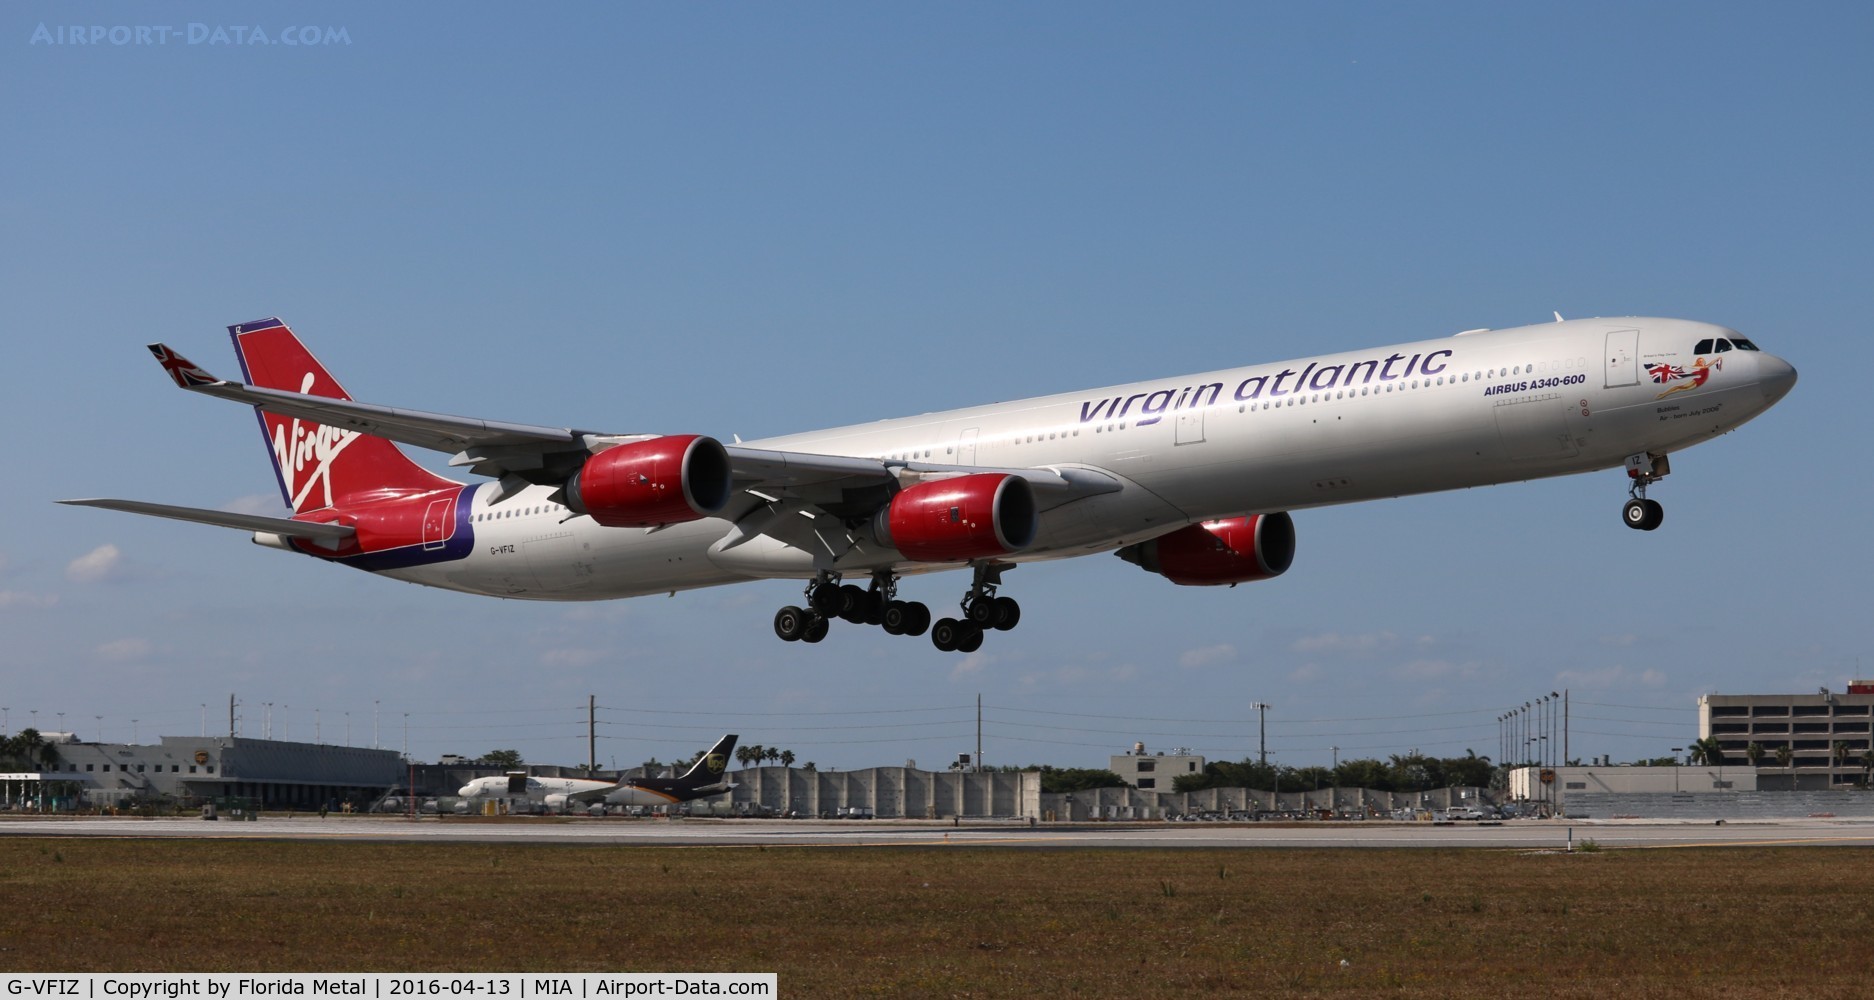 G-VFIZ, 2006 Airbus A340-642 C/N 764, Virgin Atlantic A340-600.  Apparently this aircraft is named after a 